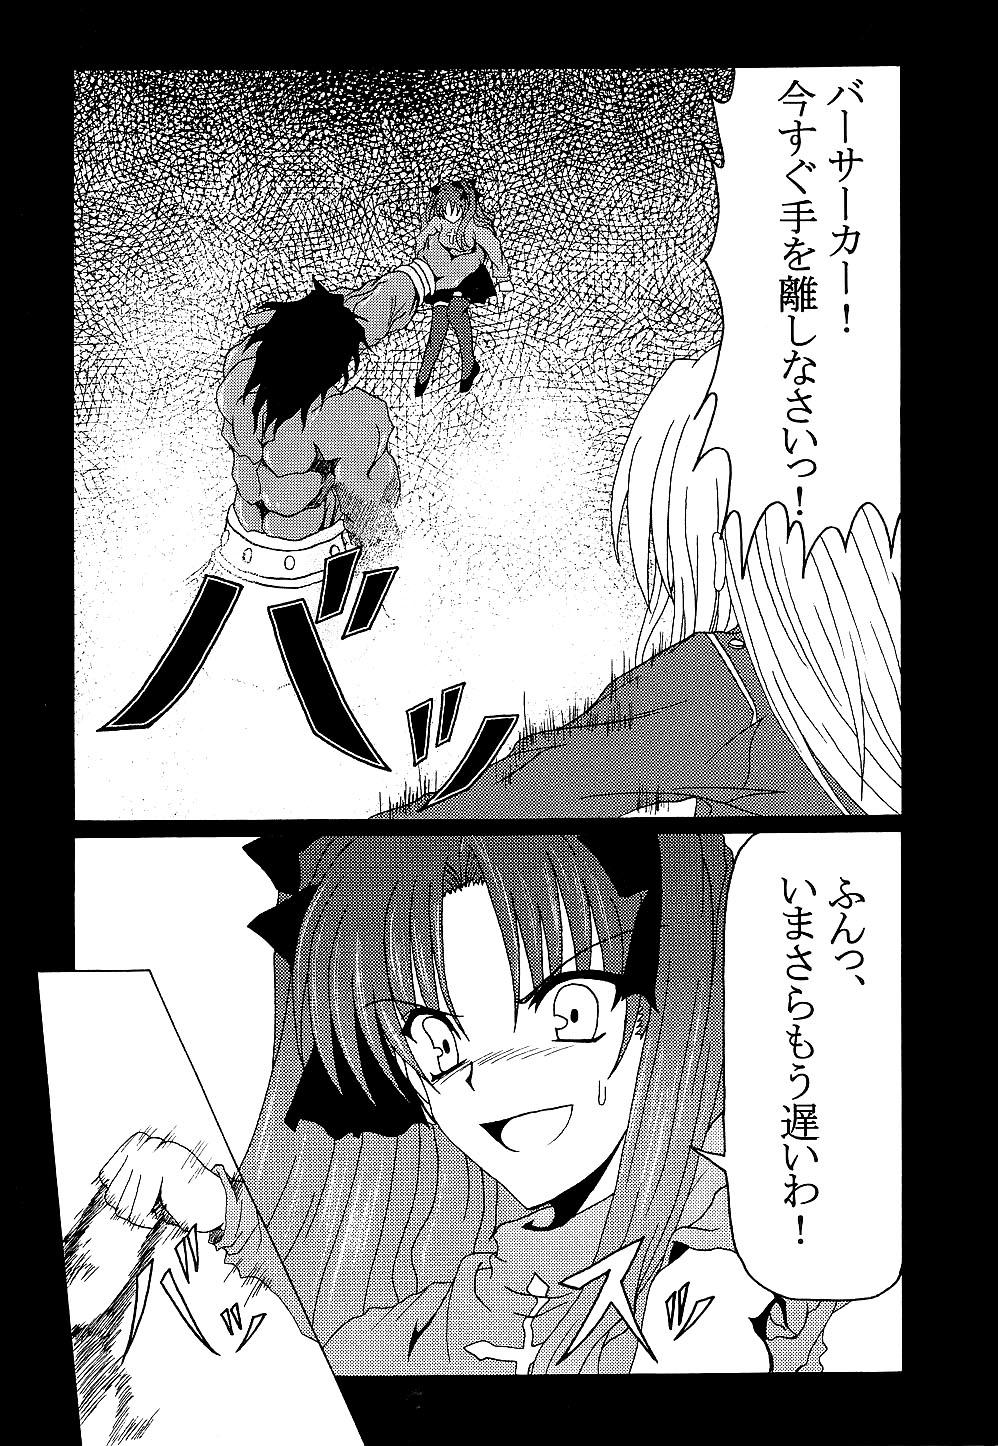 Big Boobs Fate na Kankei - Fate stay night Whore - Page 9